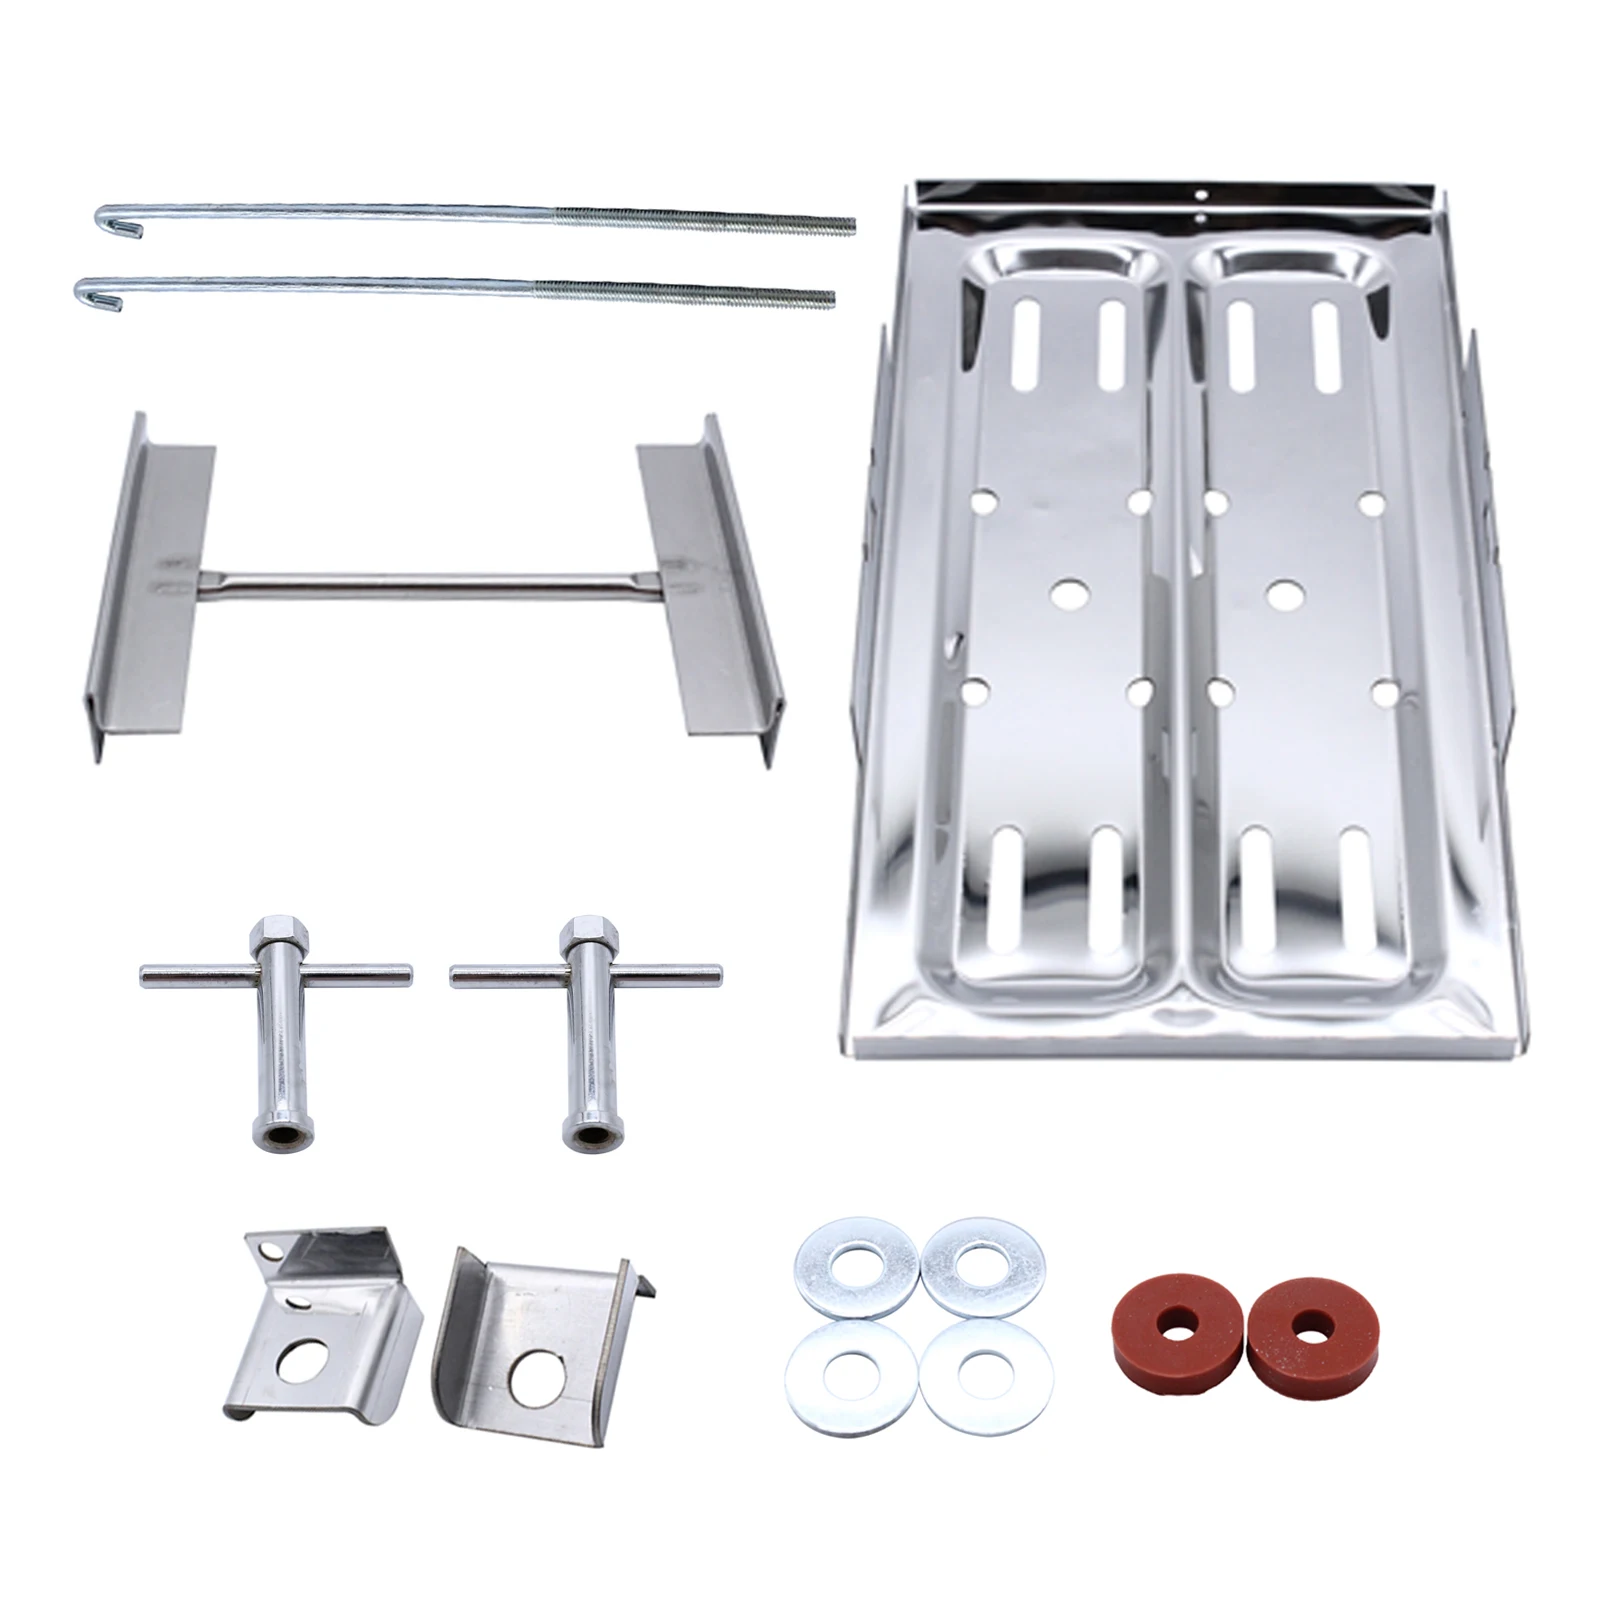 Universal Stainless Steel Battery Tray Holder Hold Down Kit 7 1/2